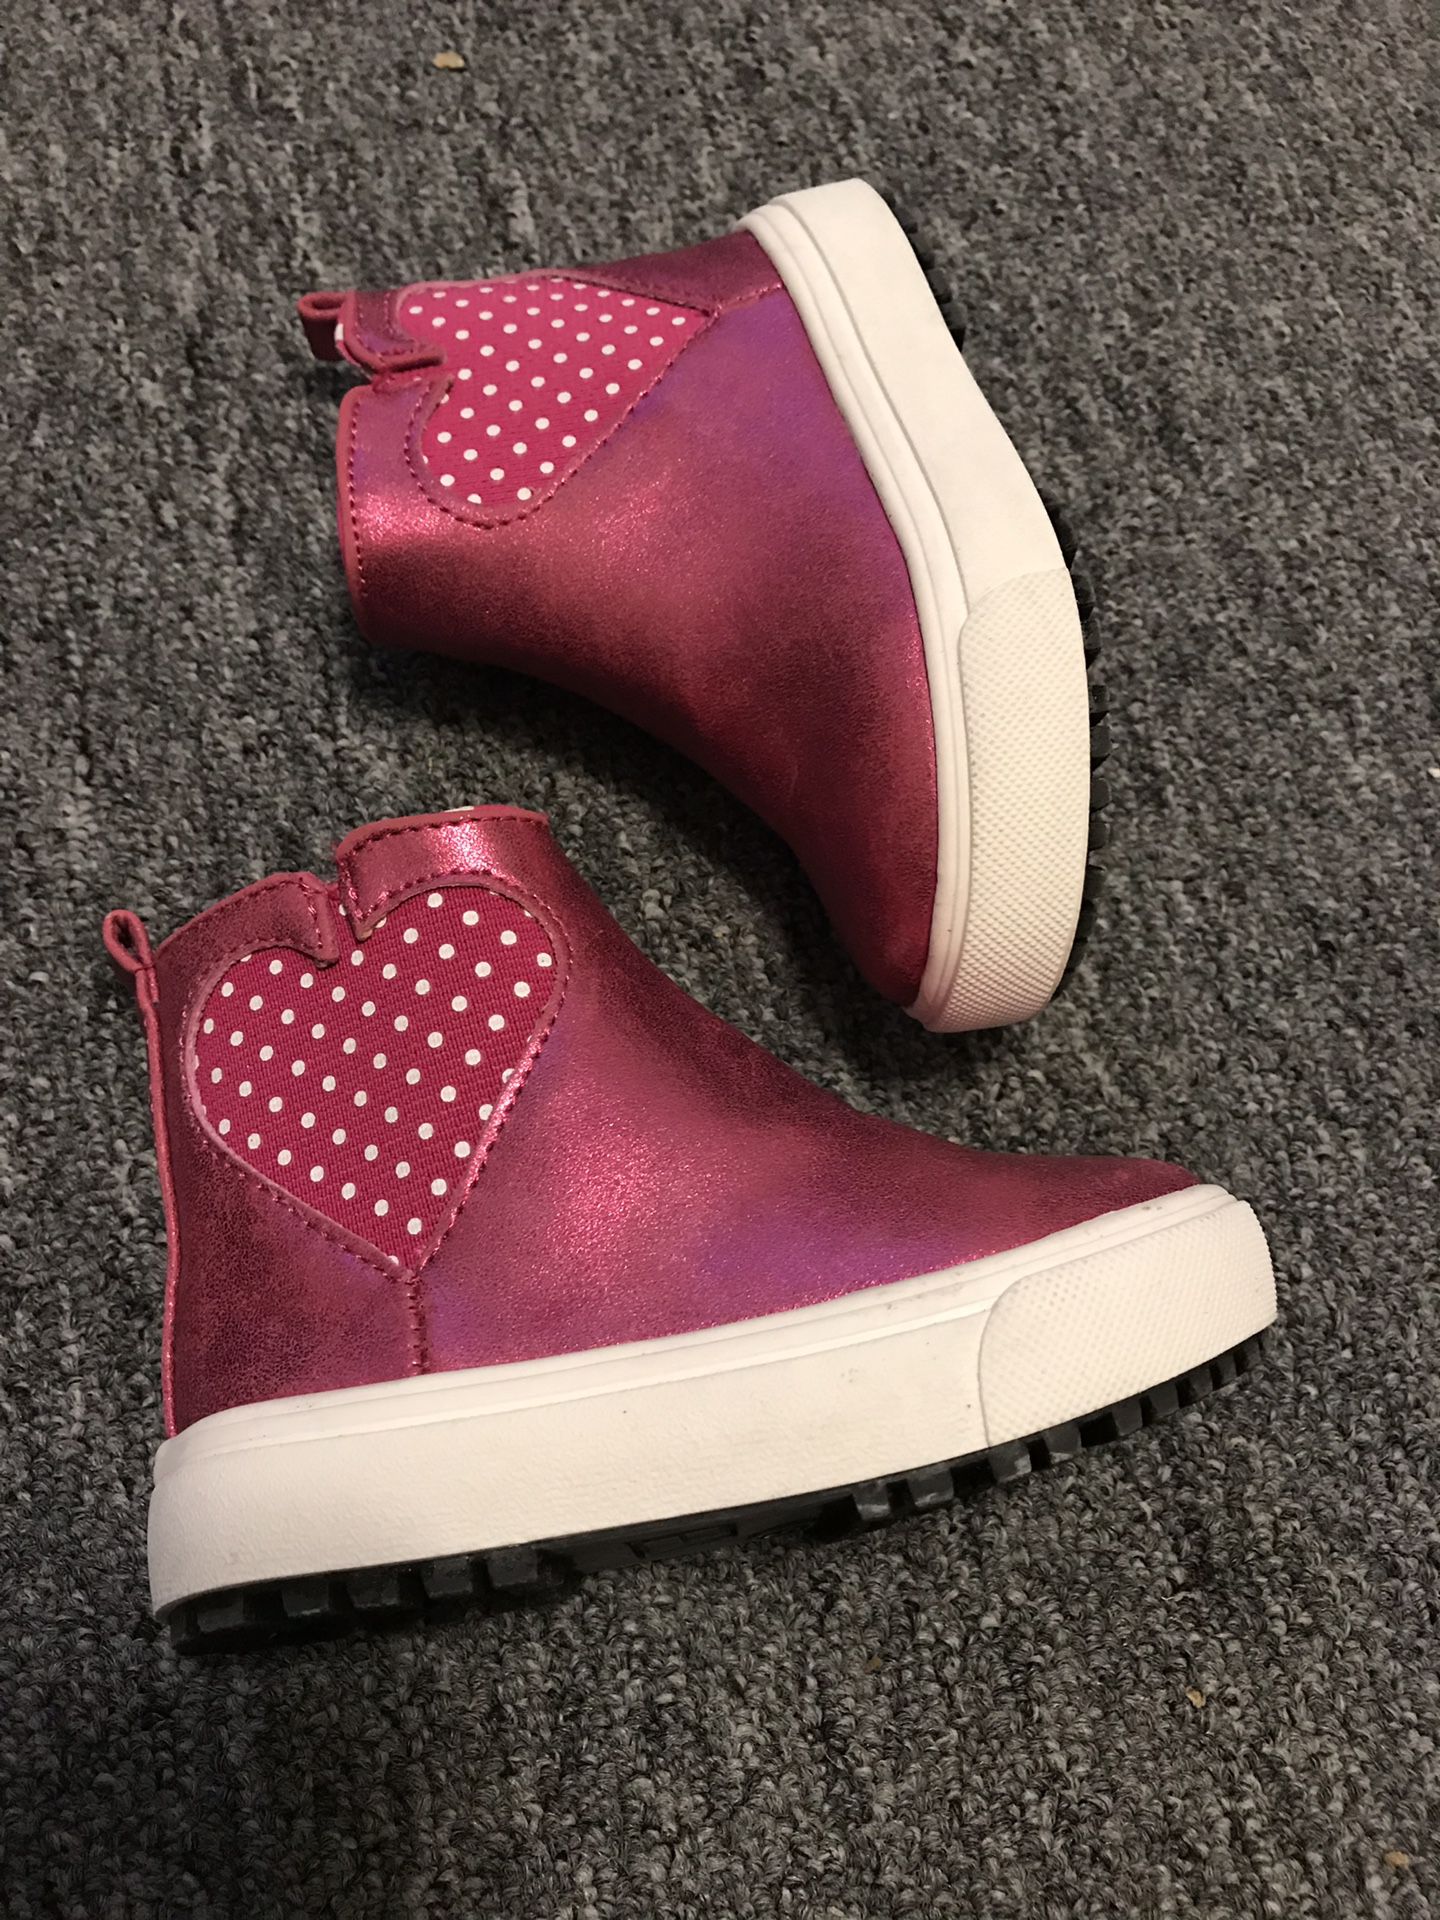 New girls 5c boots